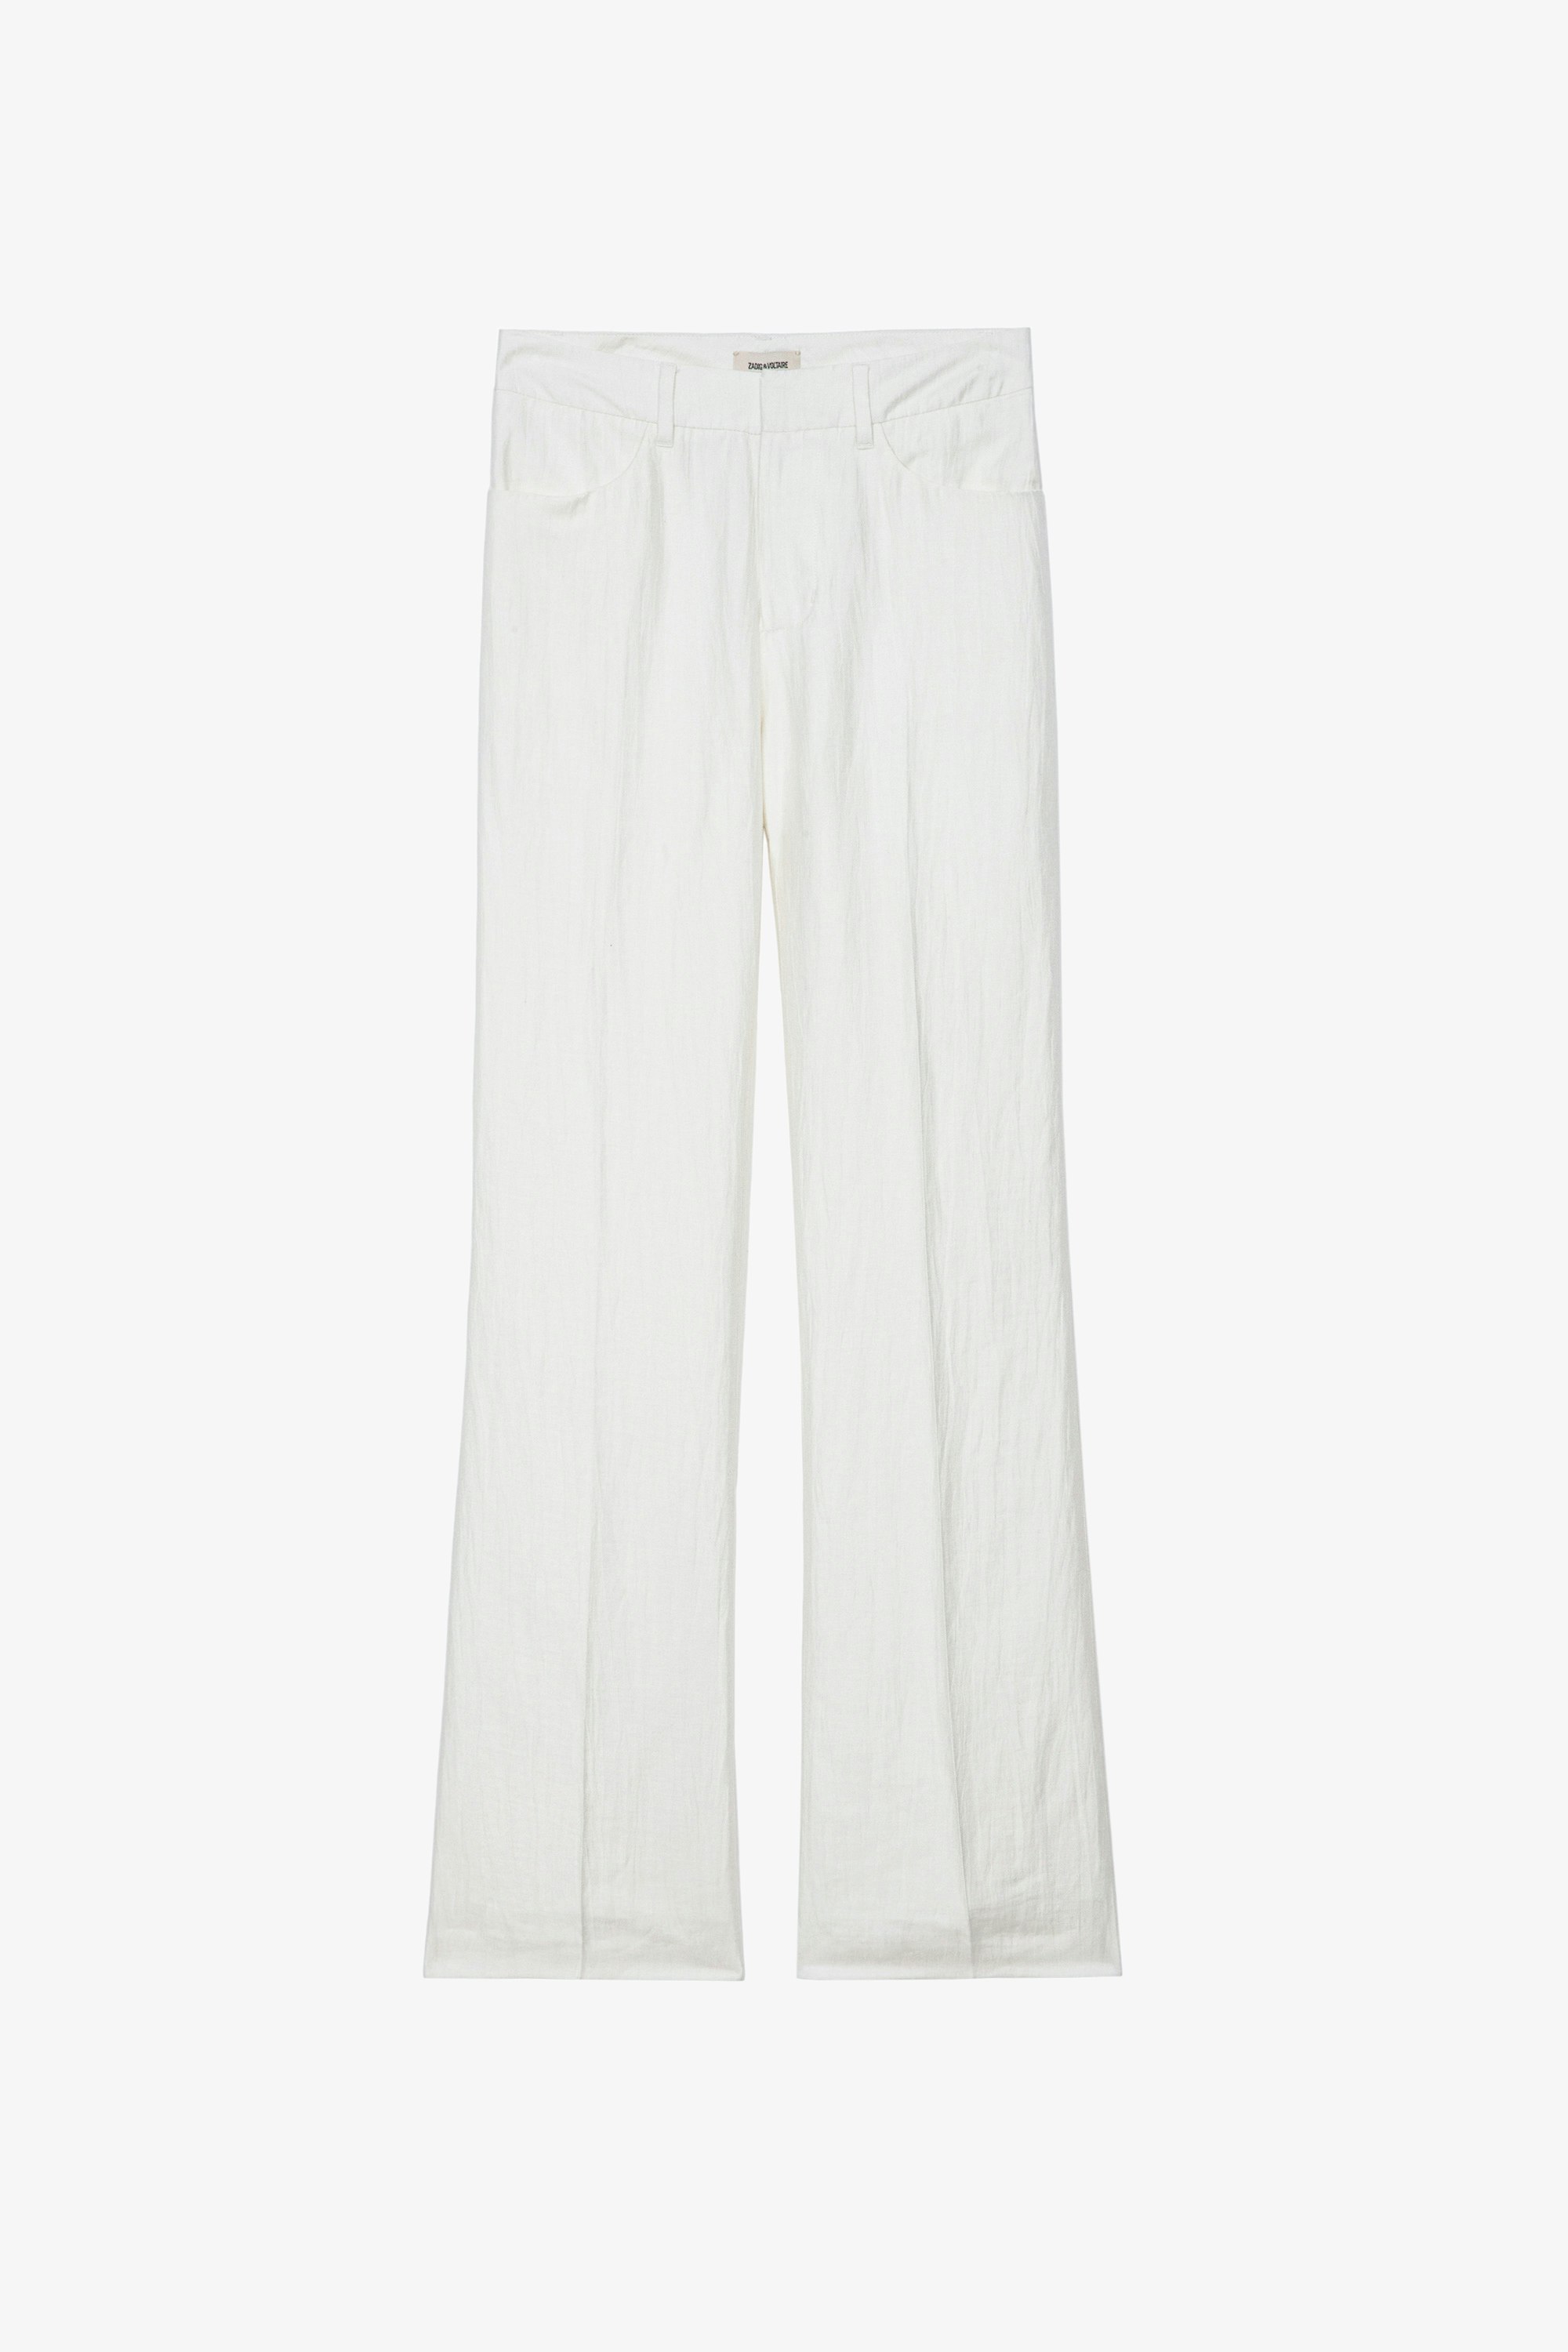 Pistol Trousers - White linen flared tailored trousers with pockets and pleats.